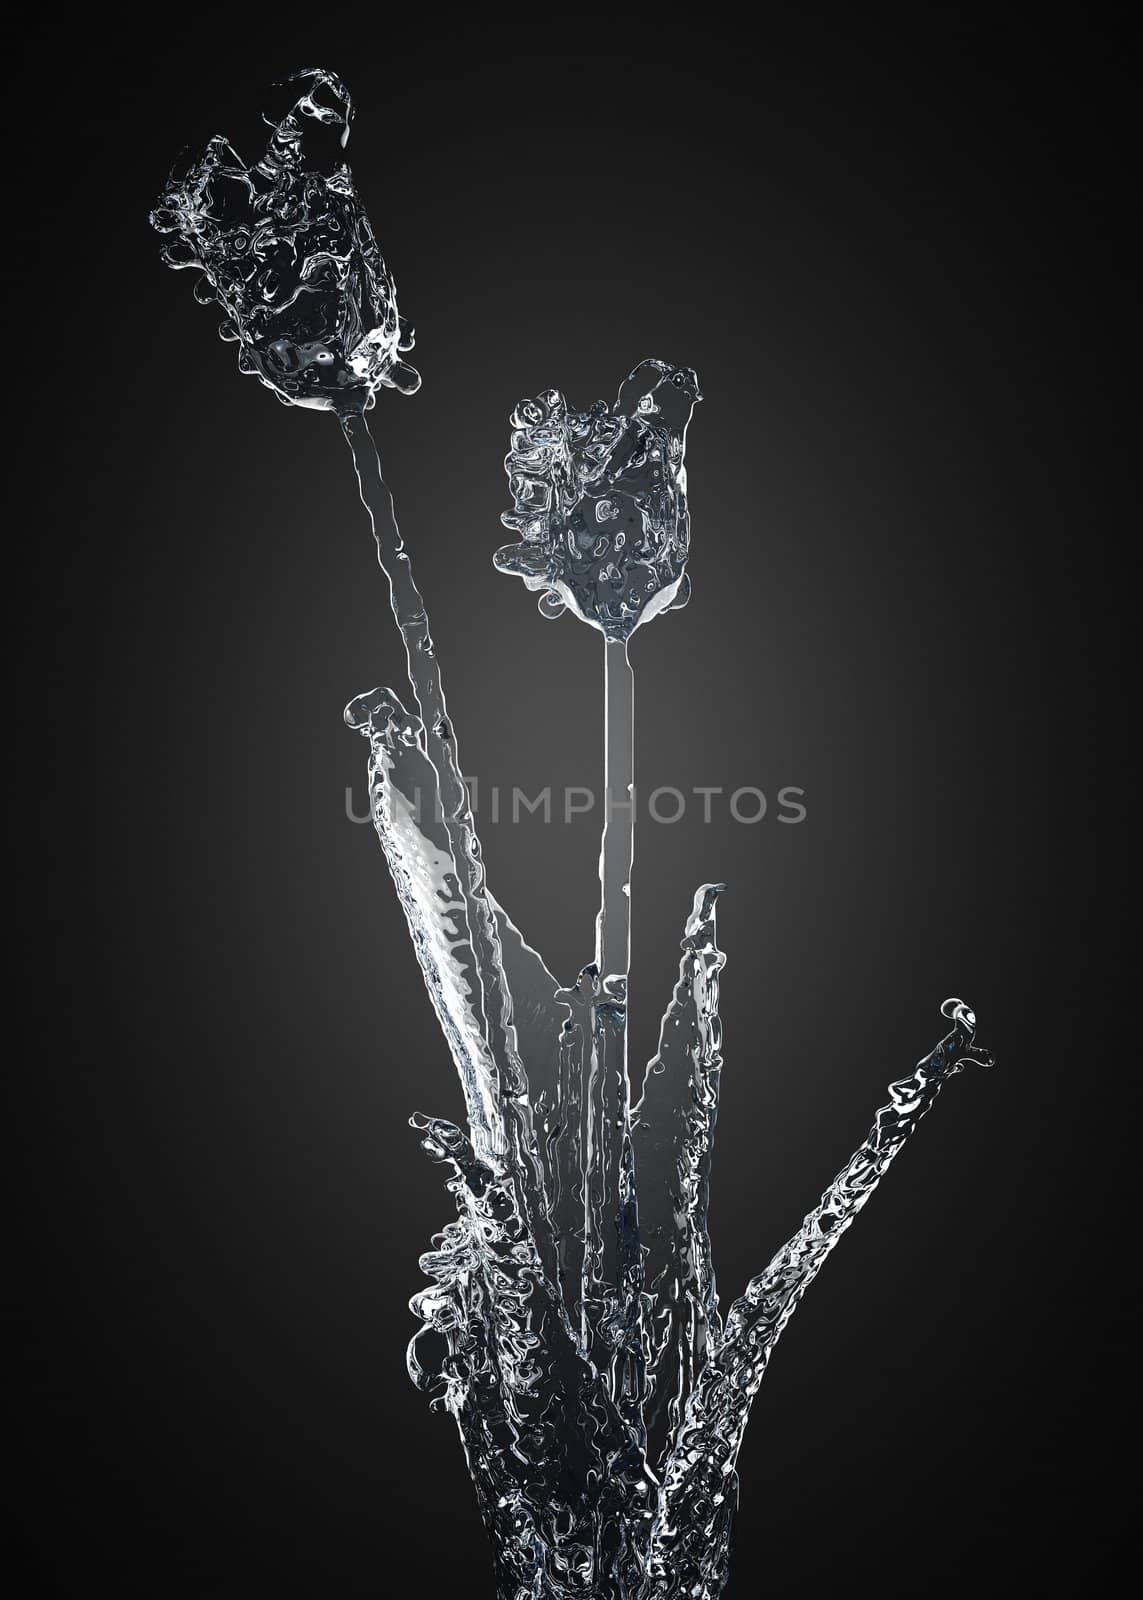 Flower of ice by videodoctor